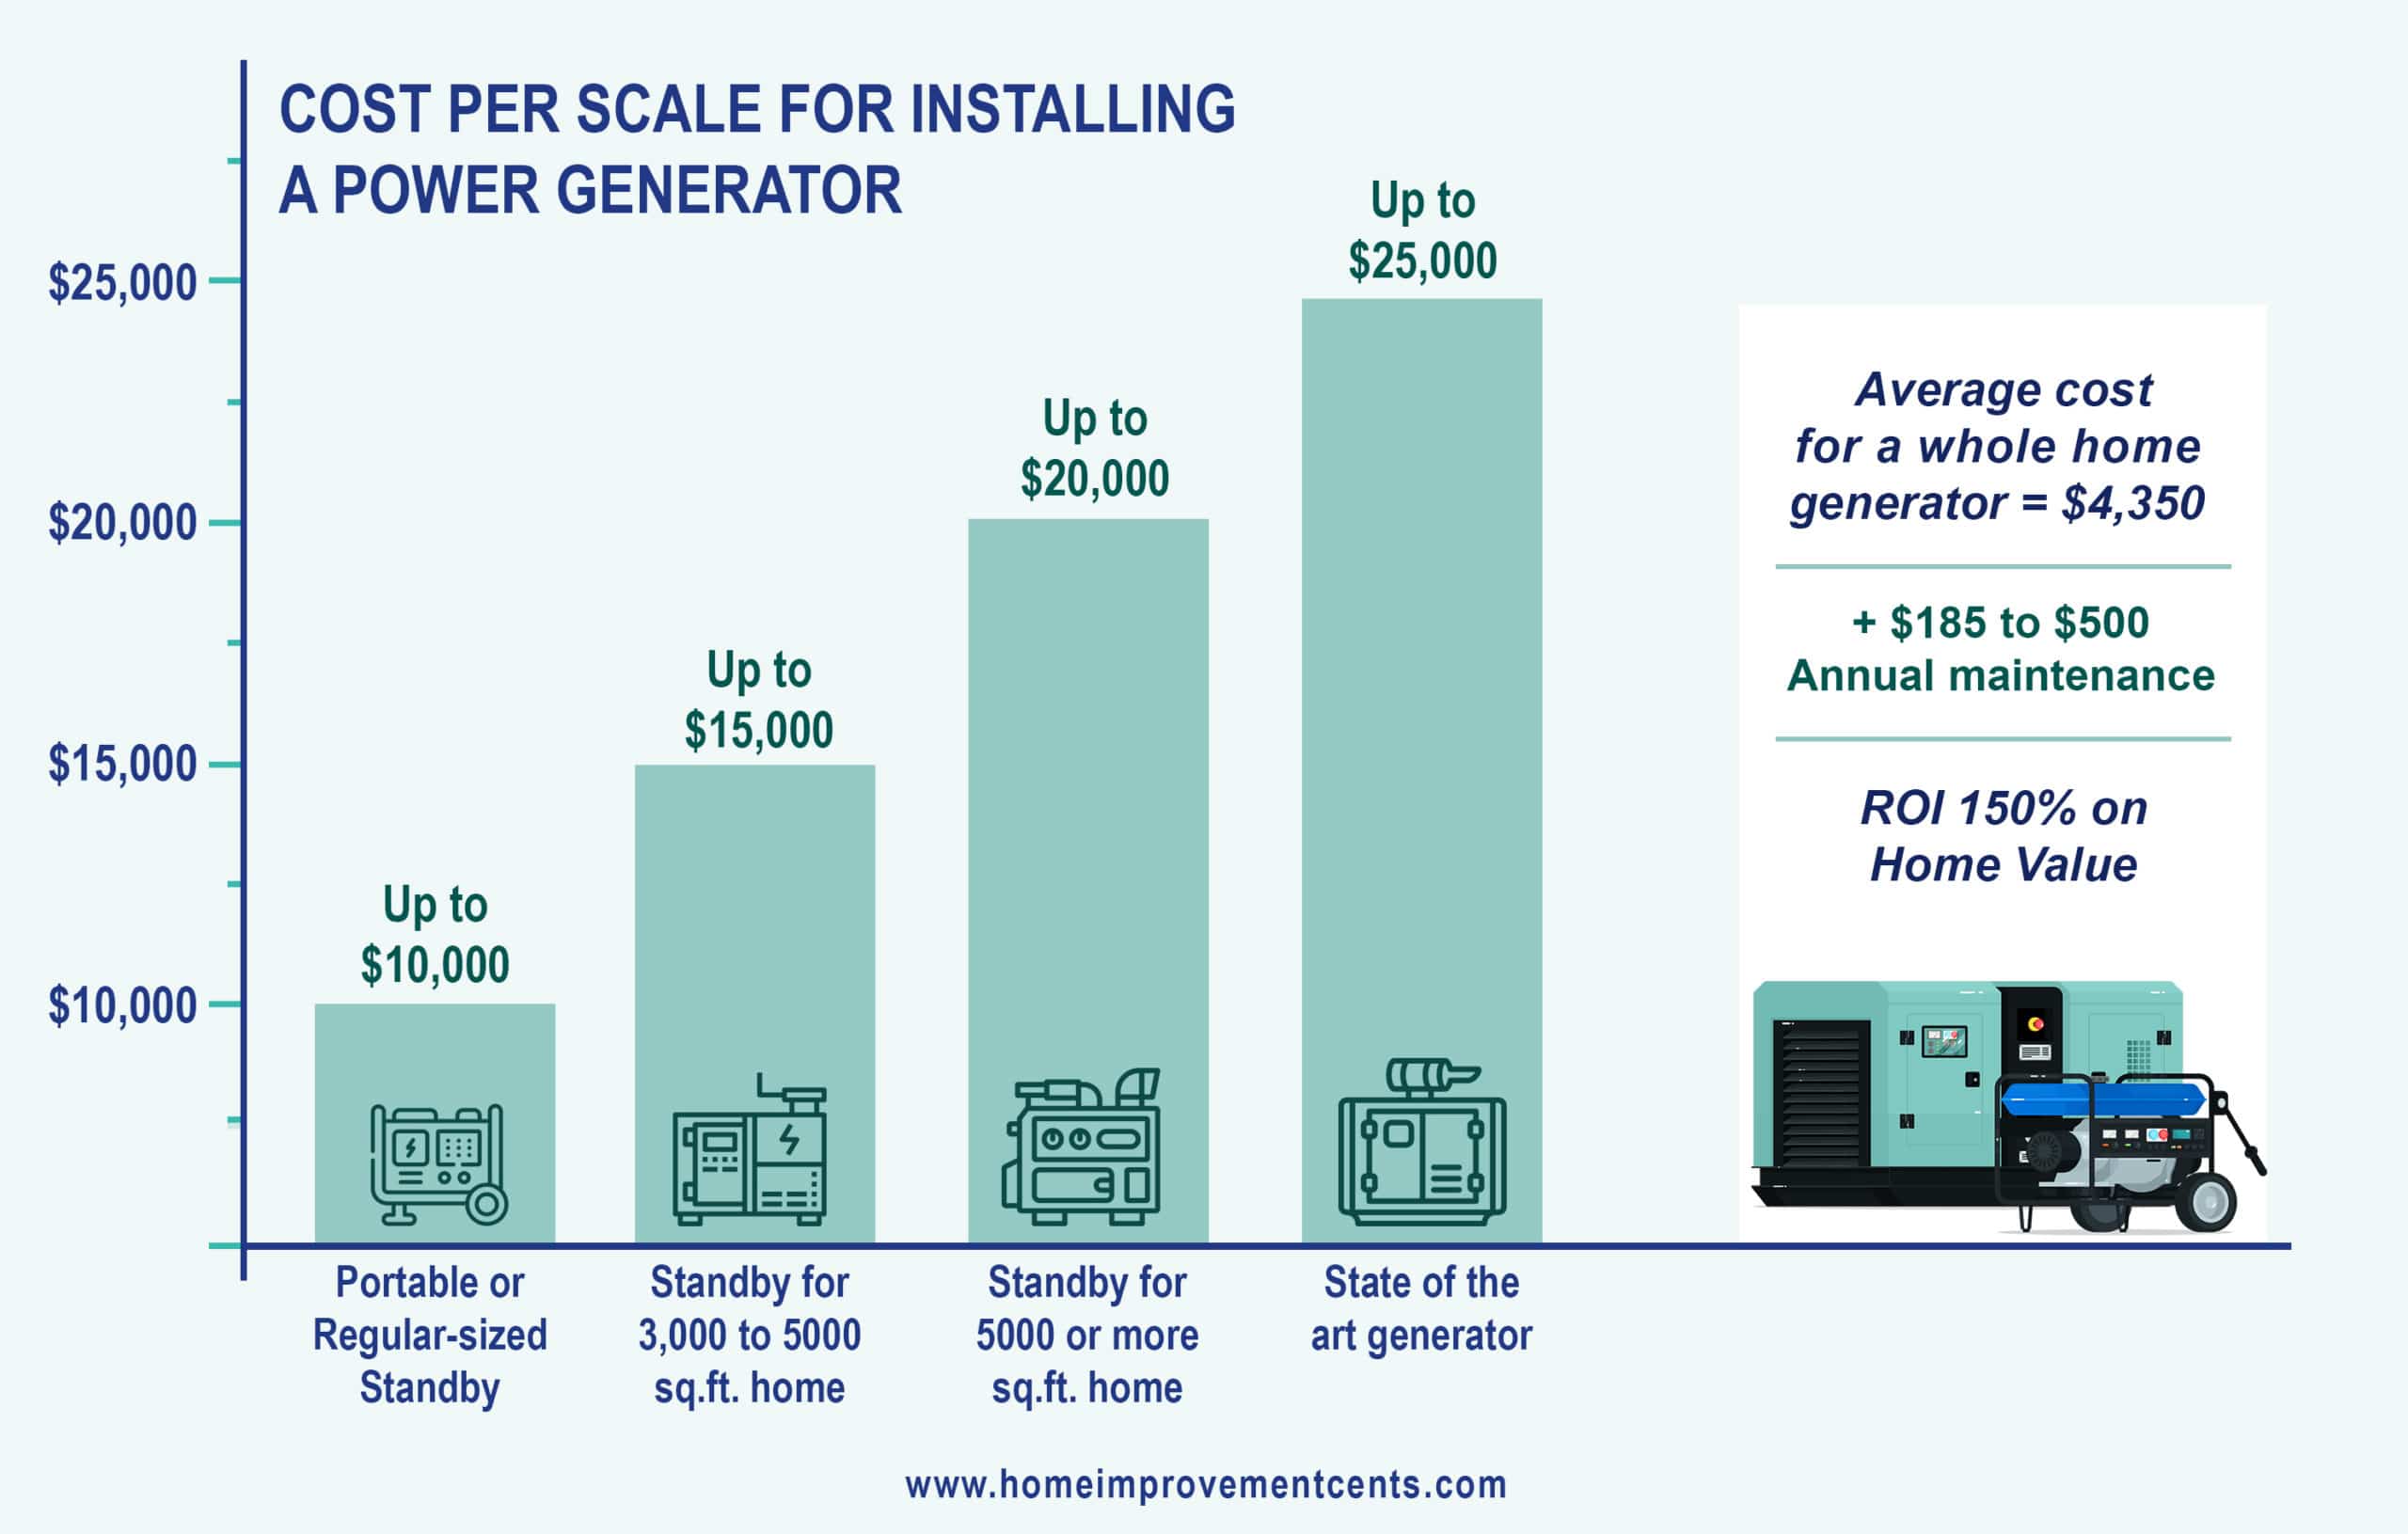 Chart showing the cost of a whole house generator installed from portable / standby to 5000 sqft or more home